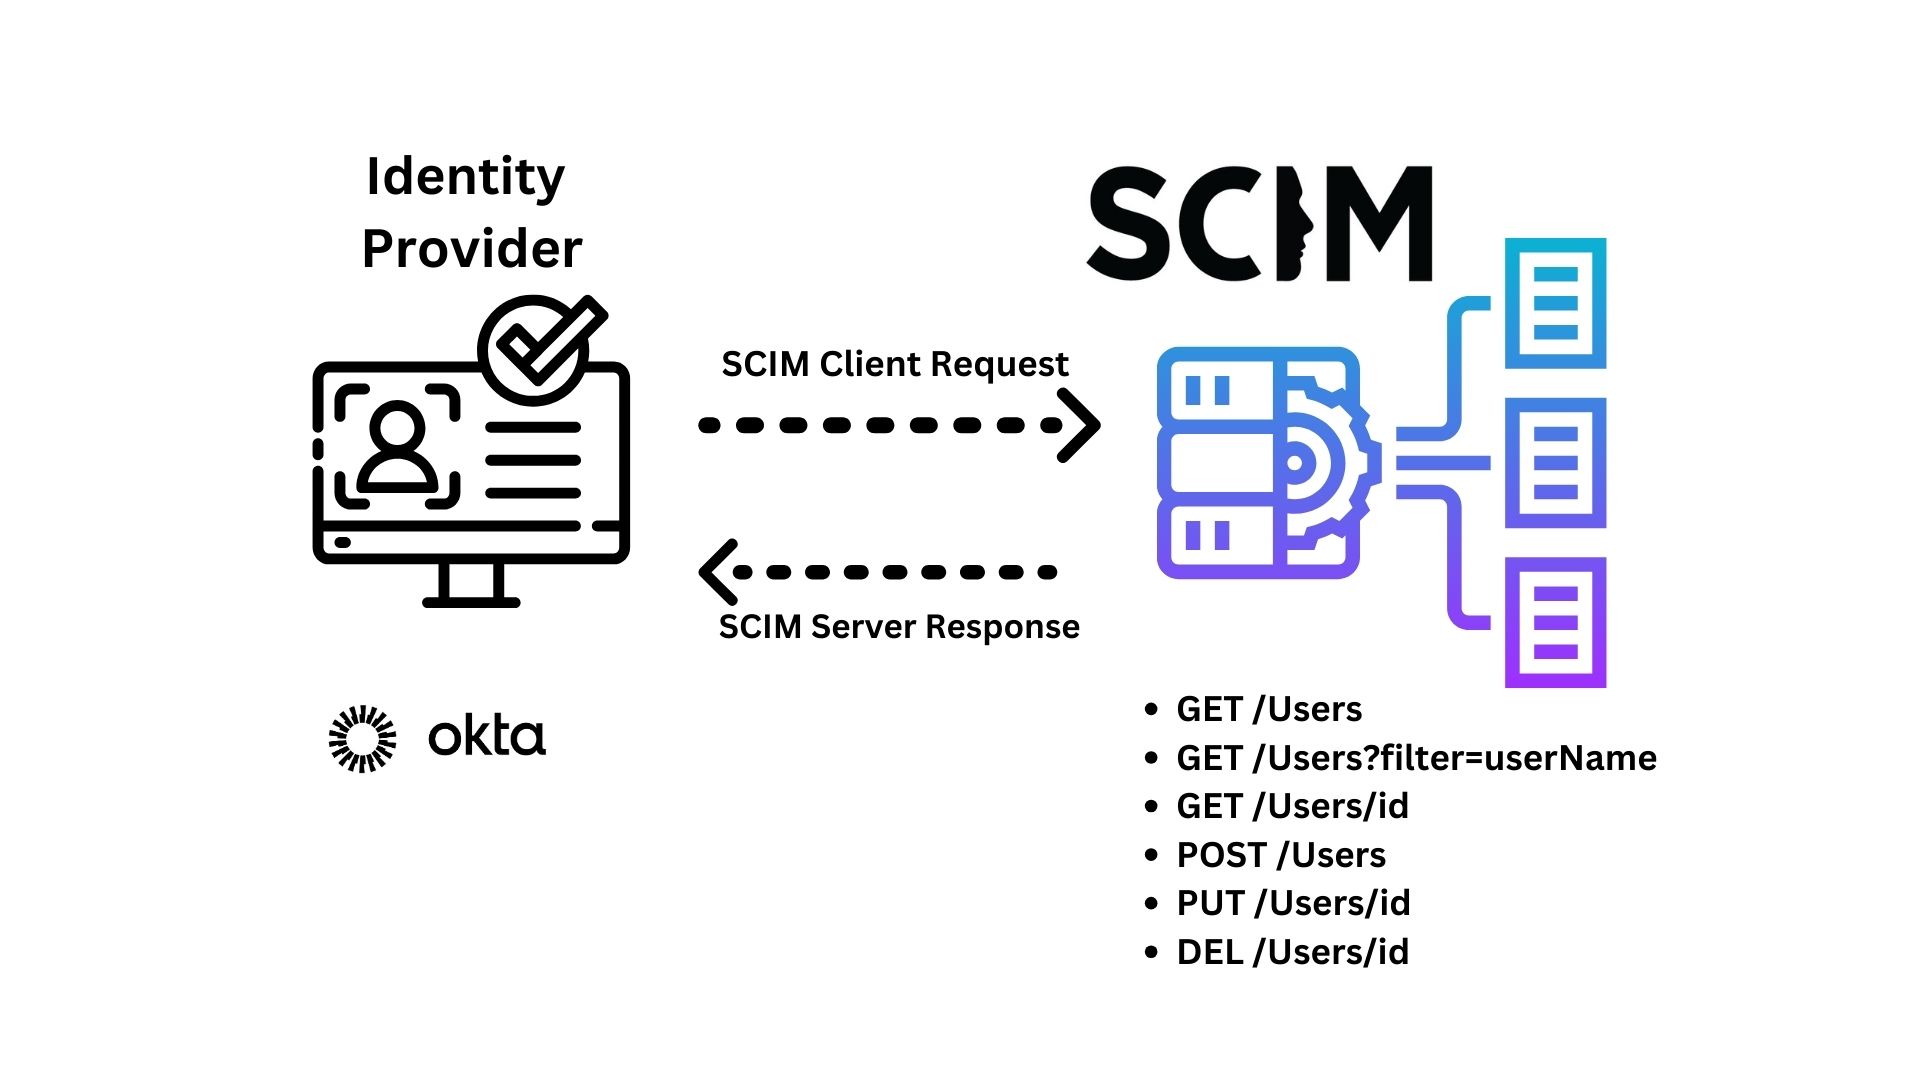 Diagram of SCIM workflow showing the Identity Provider requests the SCIM server with GET, POST, PUT, and DEL user calls and the SCIM server responds with a standard SCIM interface